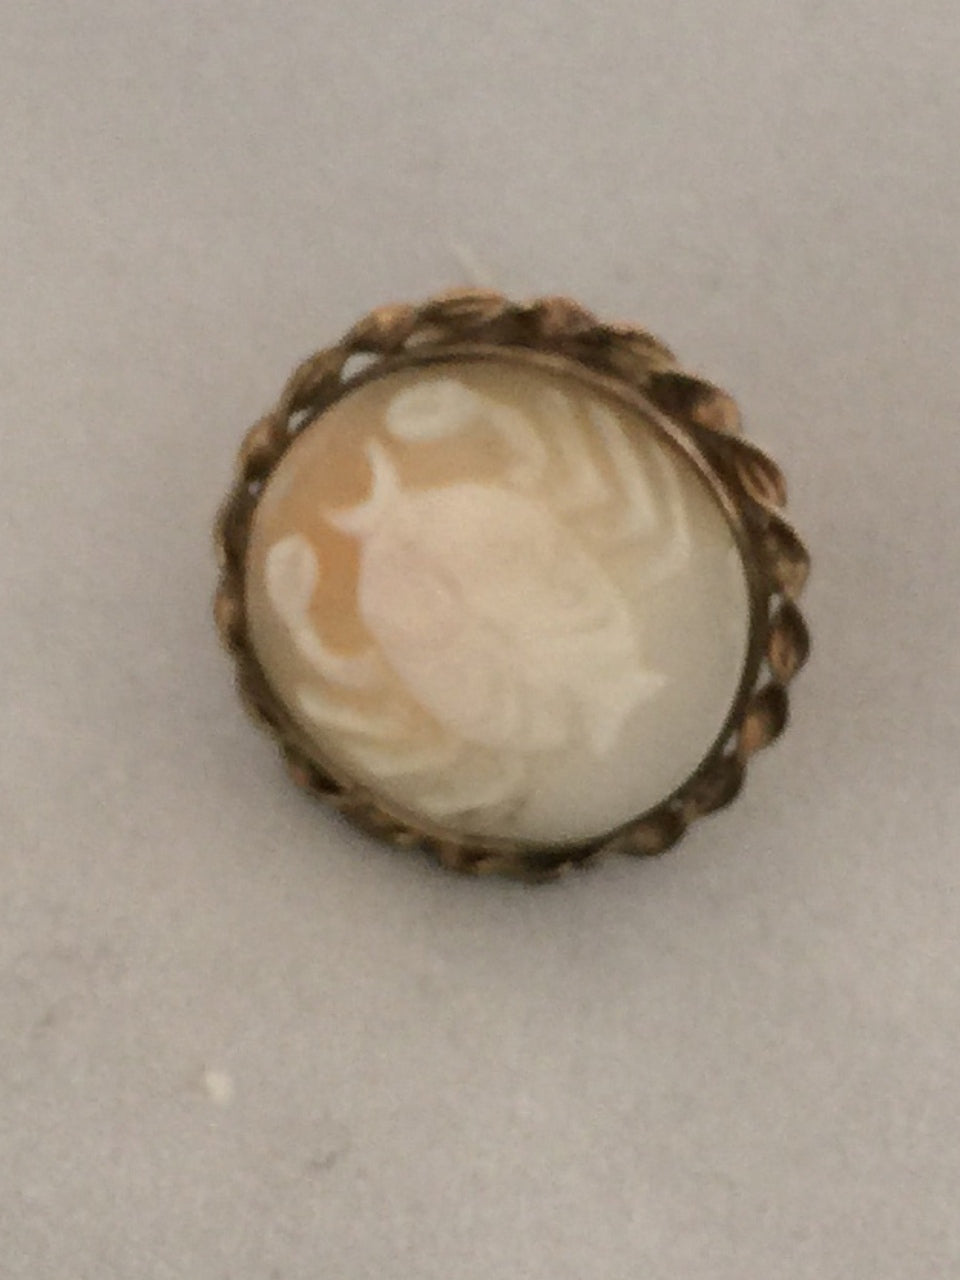 Crab Cameo Adjustable Ring Carved from Shell Antique or Vintage Size 5 to 9